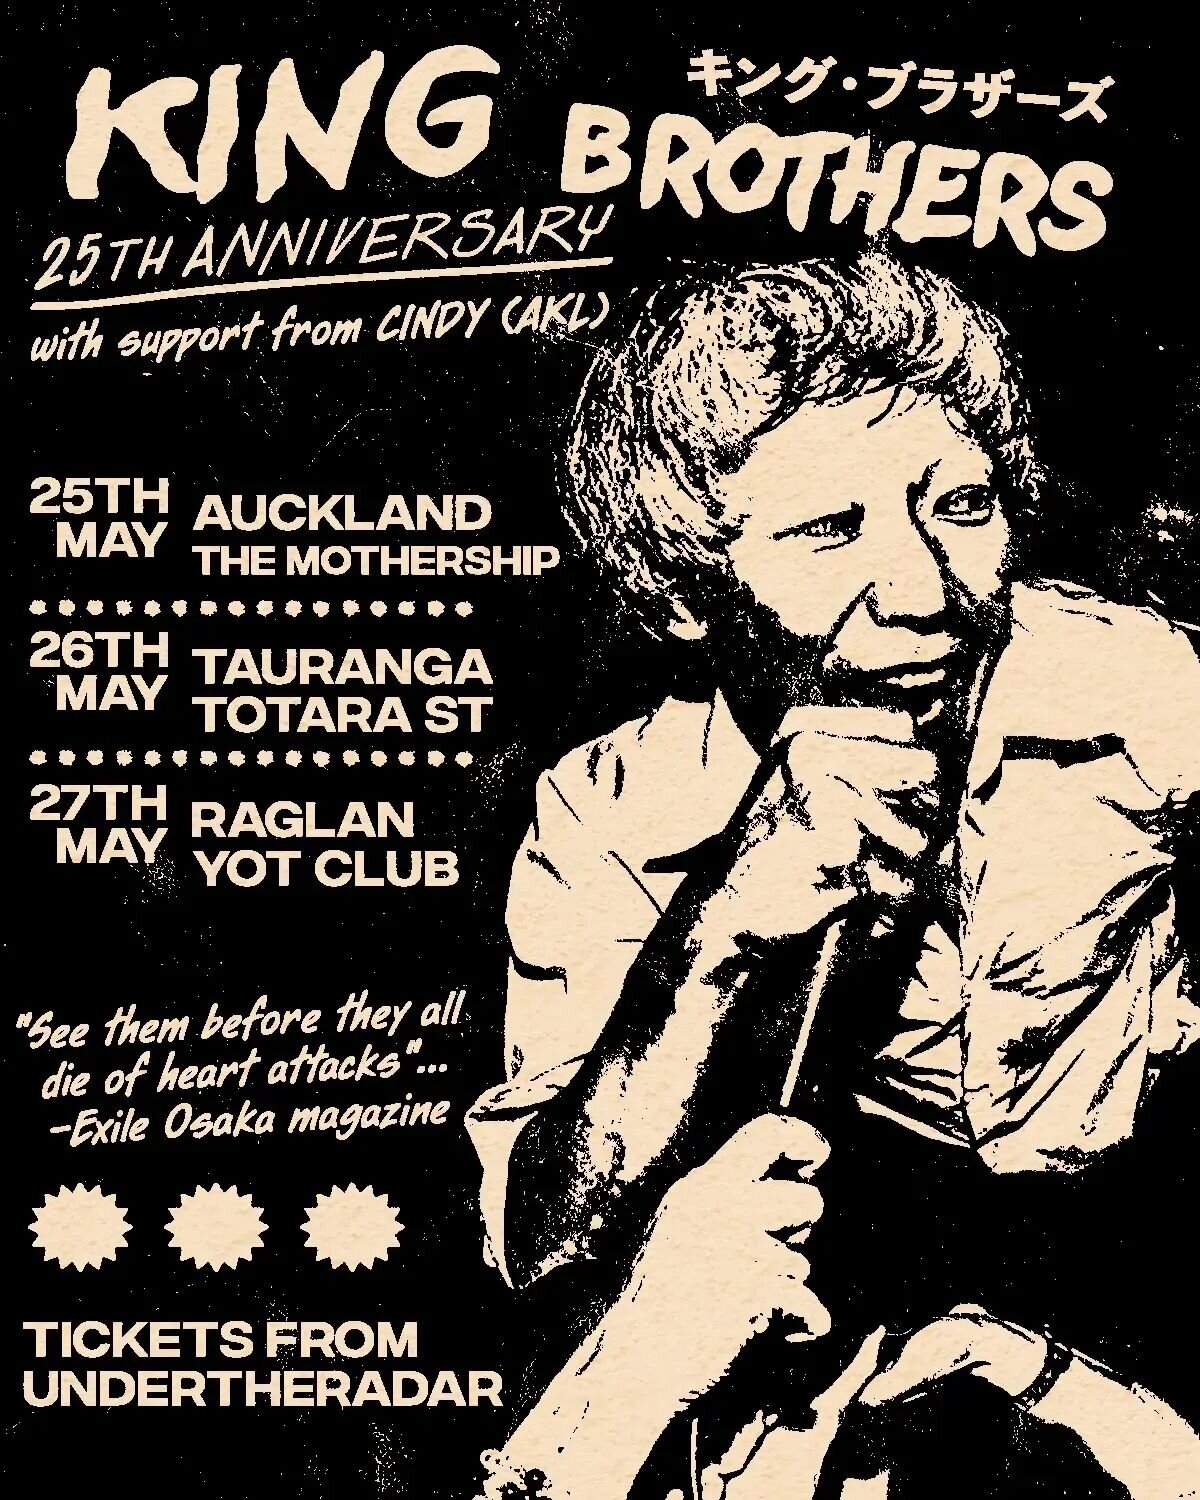 Definitely not to be confused with the British pop vocal trio of the same name, Japan's King Brothers have taken on legendary status both in their homeland and internationally for their high-intensity garage punk shows and stage/crowd-destroying anti